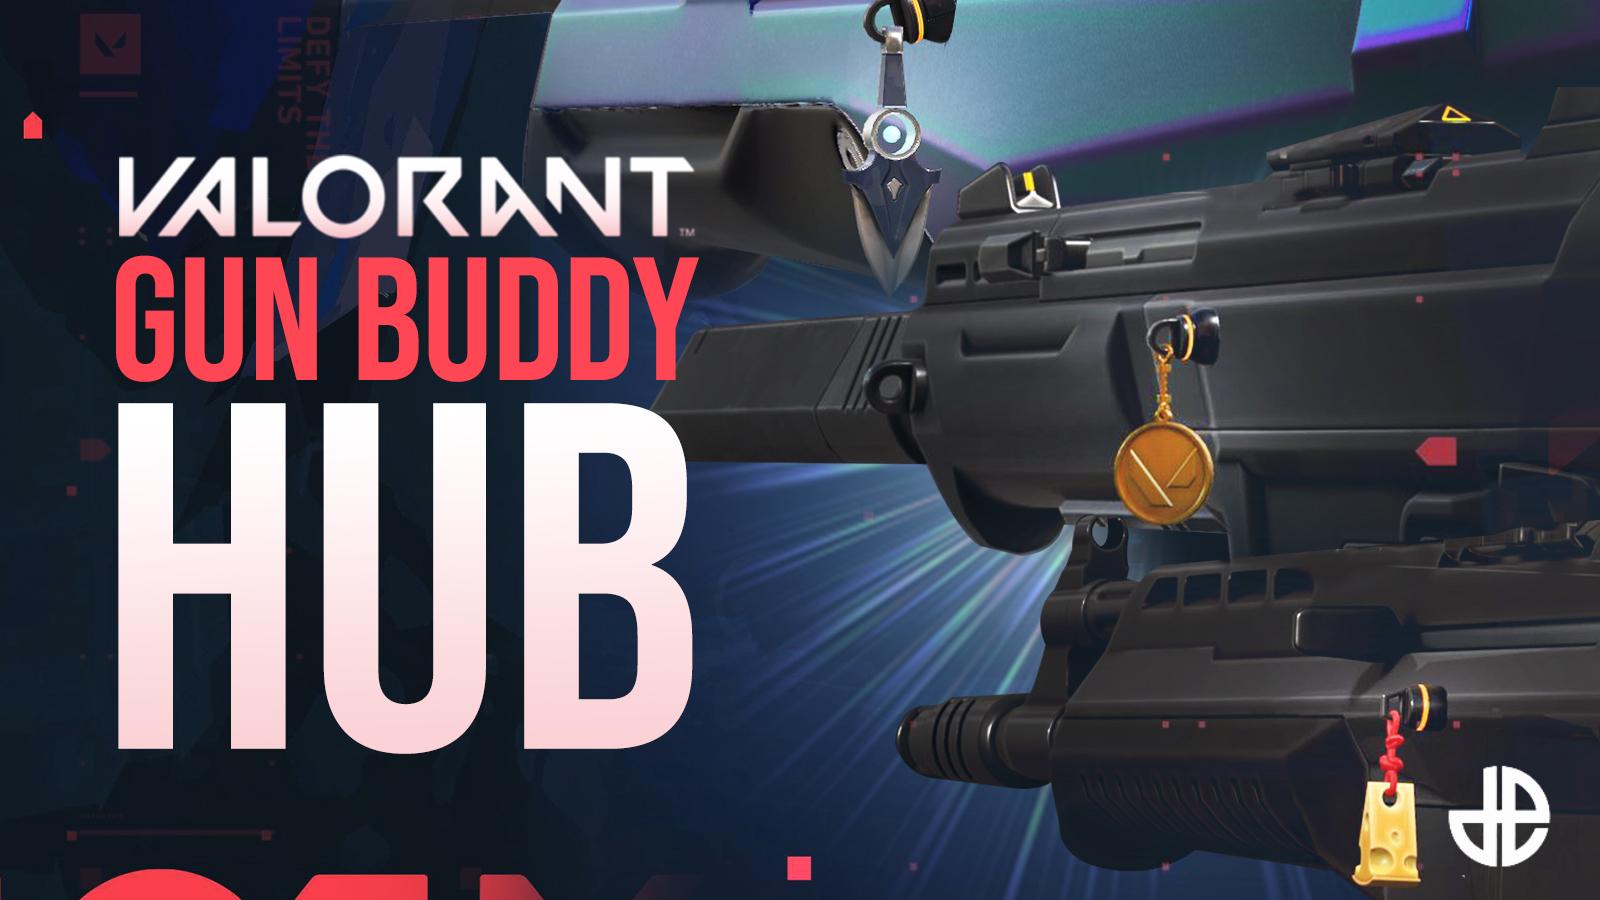 Claim Valorant Exclusive Gun Buddy “Zoomer Pop” With Prime Gaming - Valorant  Item Store Skins and News